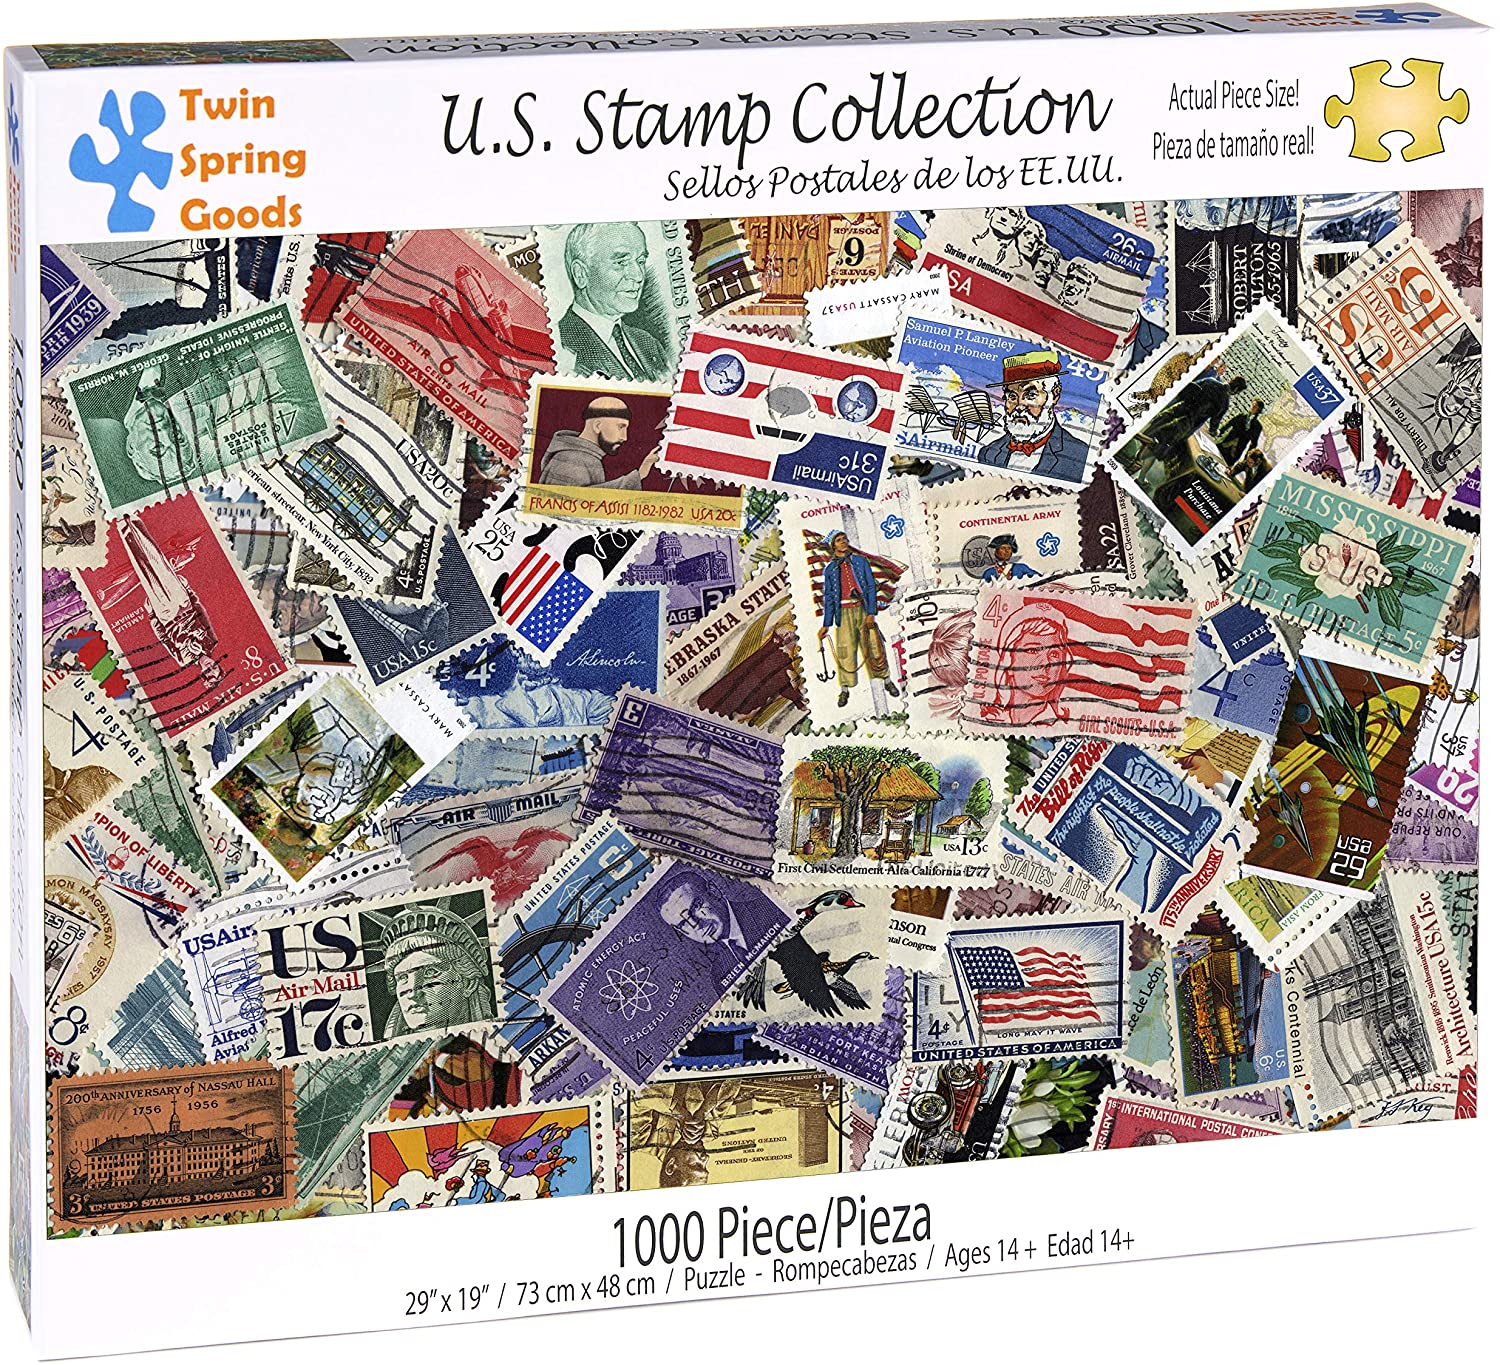 U.S. Stamp Collection (1000 pc puzzle)